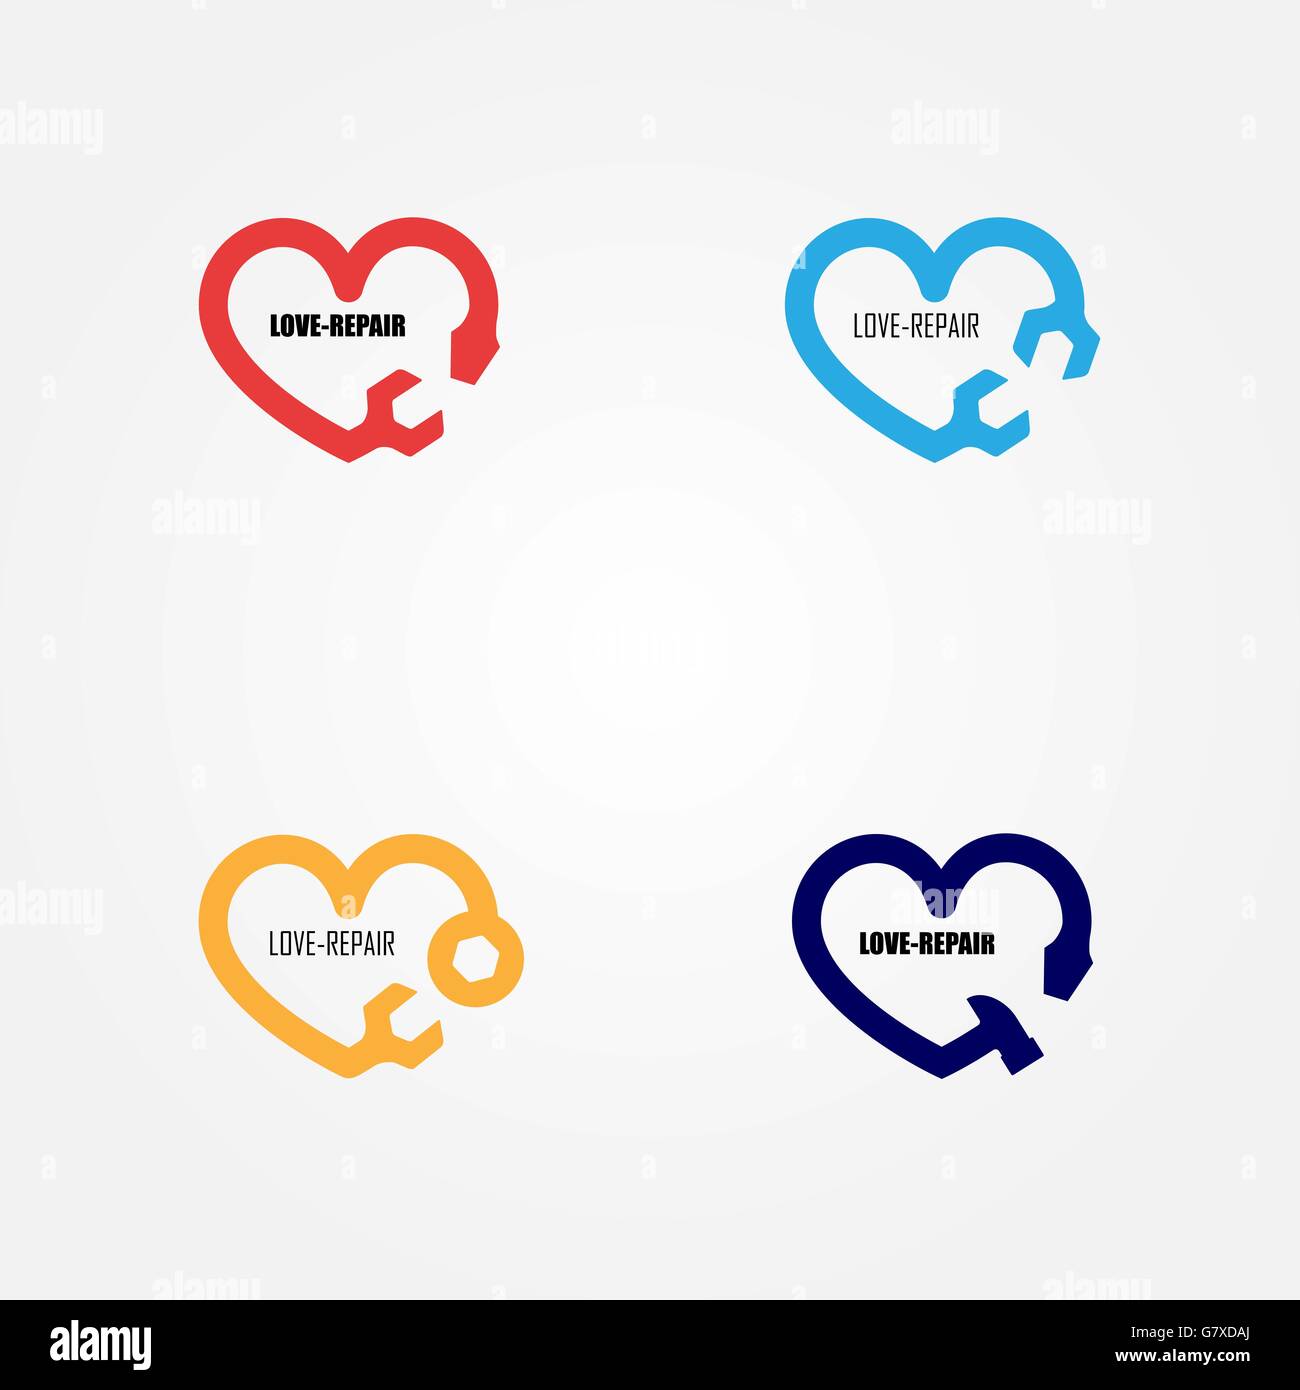 Love-Repair logo elements design.Maintenance service and engineering creative symbol.Business and industrial concept.Vector Stock Vector